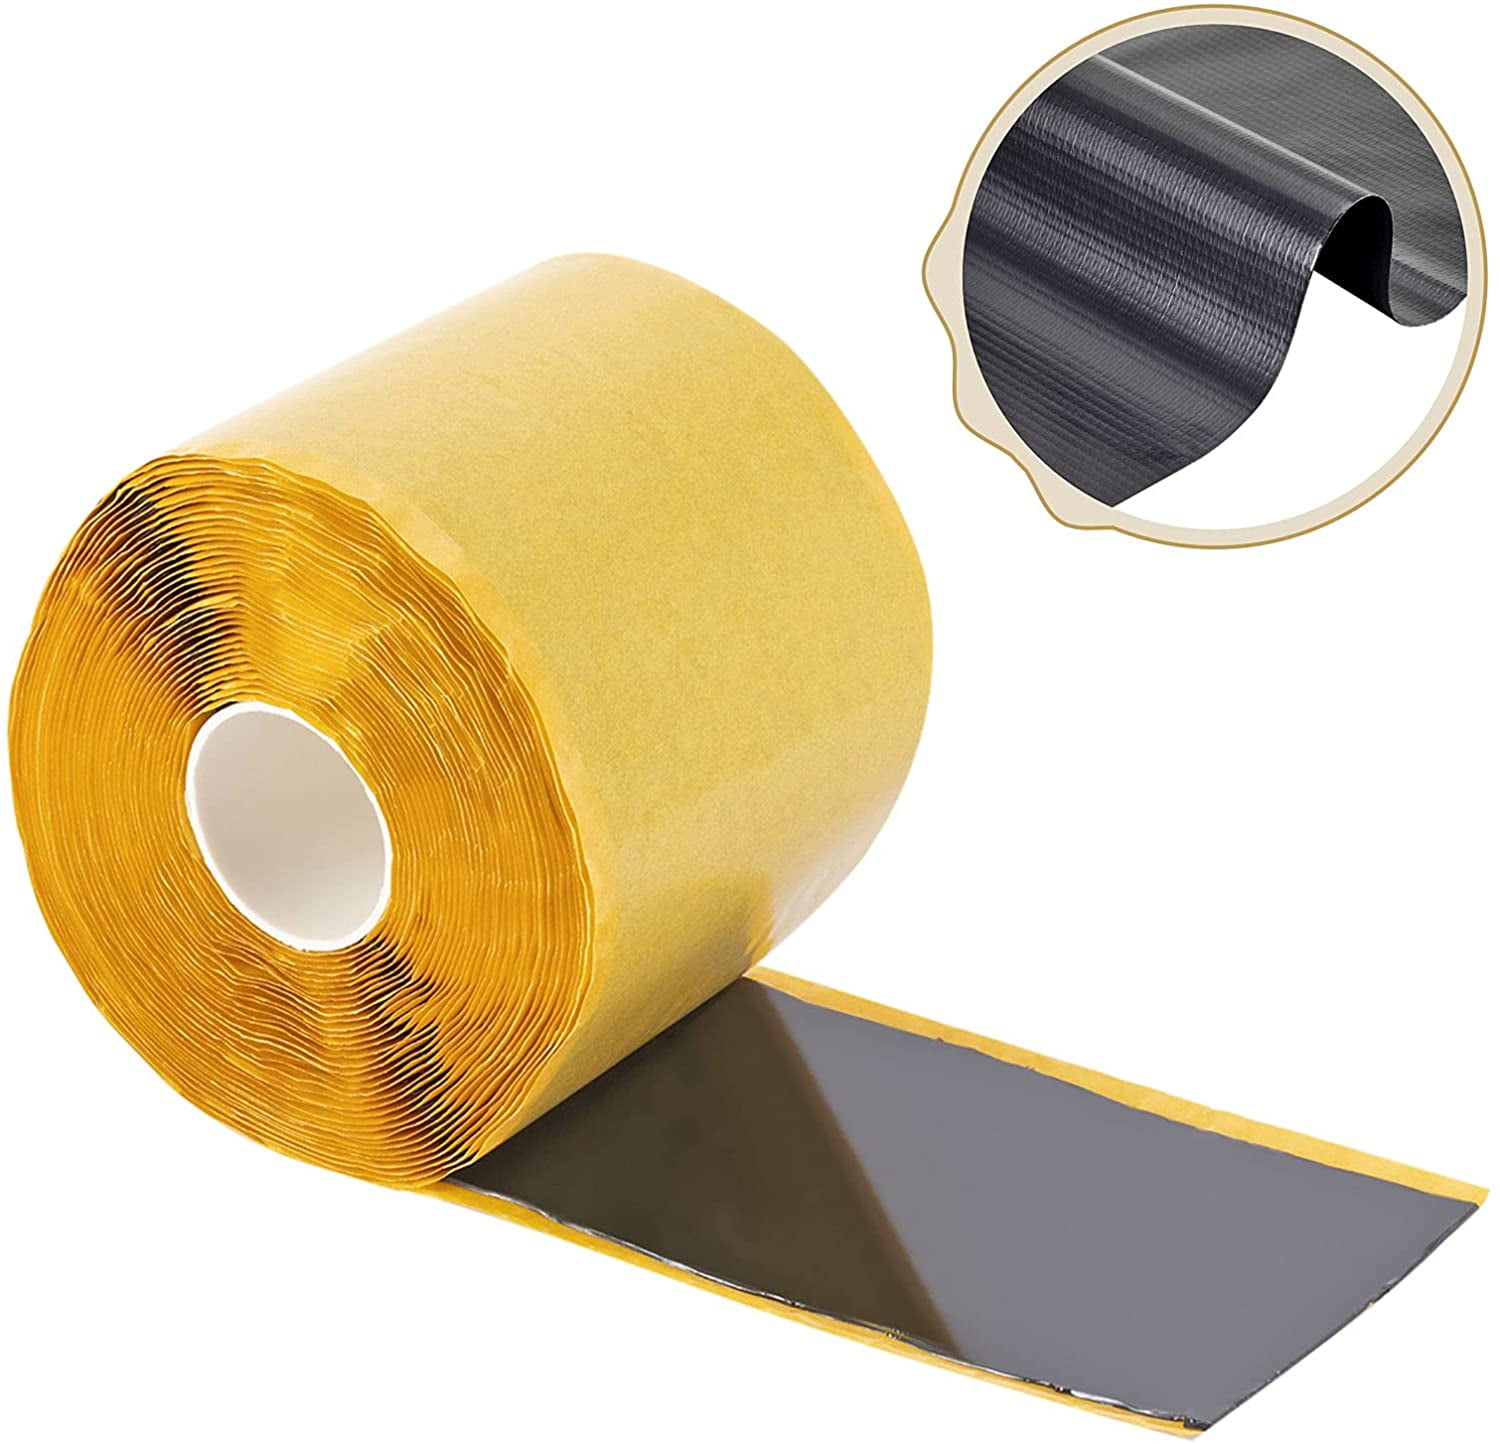 3 x 25 hygger Pond Liner Seam Tape Self Adhesive Double Sided EPDM Liner Repair Tape Cover Strip for Patch Holes and Cracks Black 